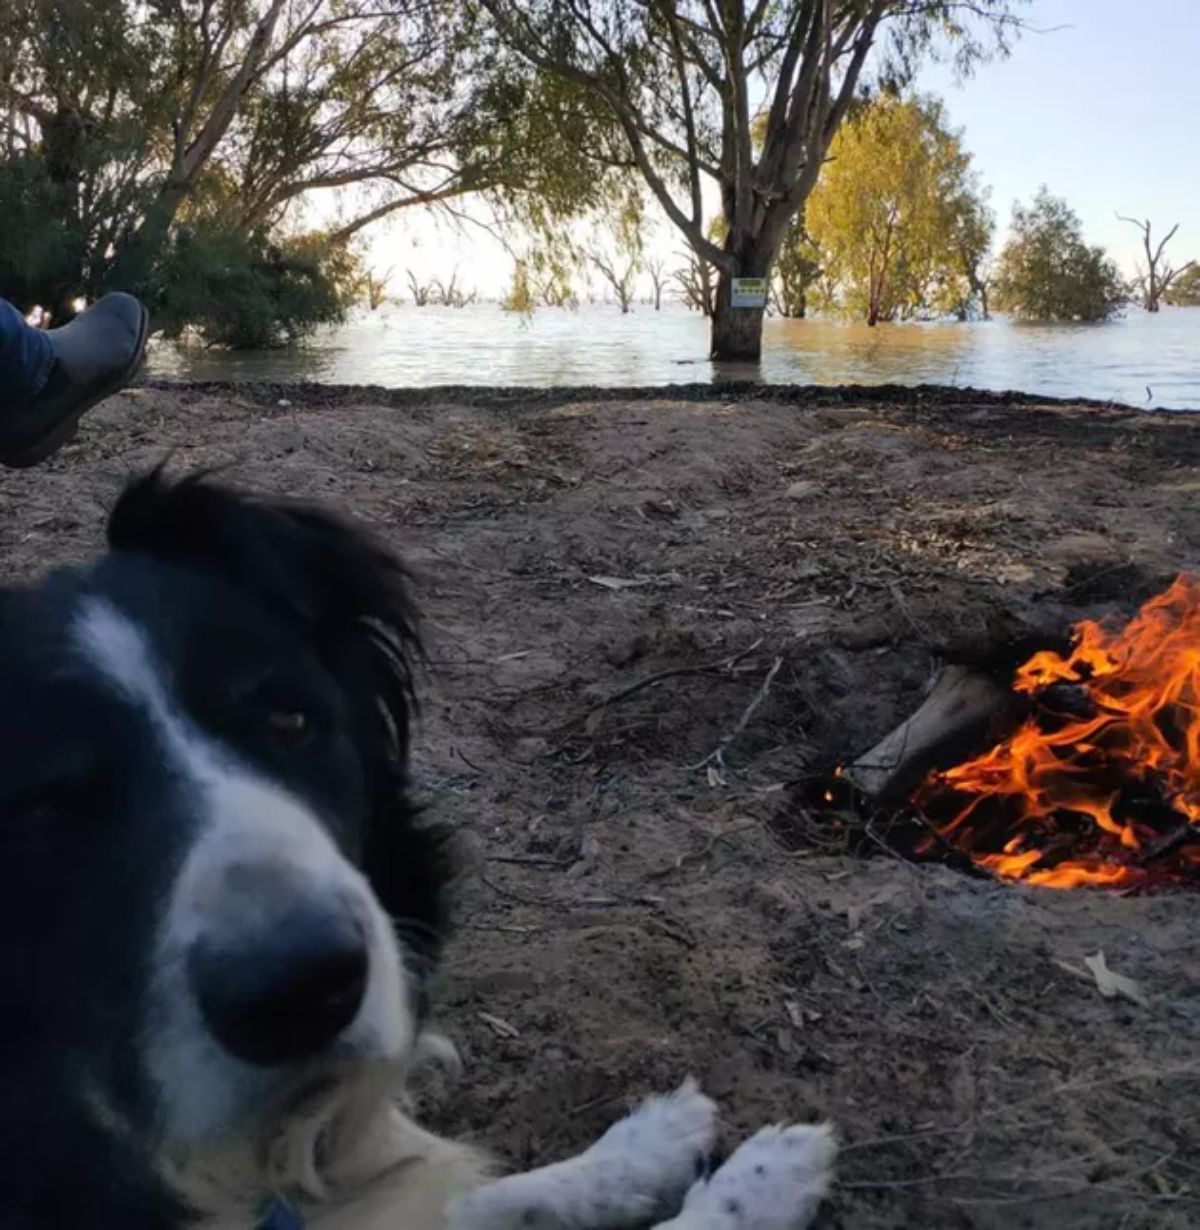 black and white dog laying on the ground in front of a camp fire by a river